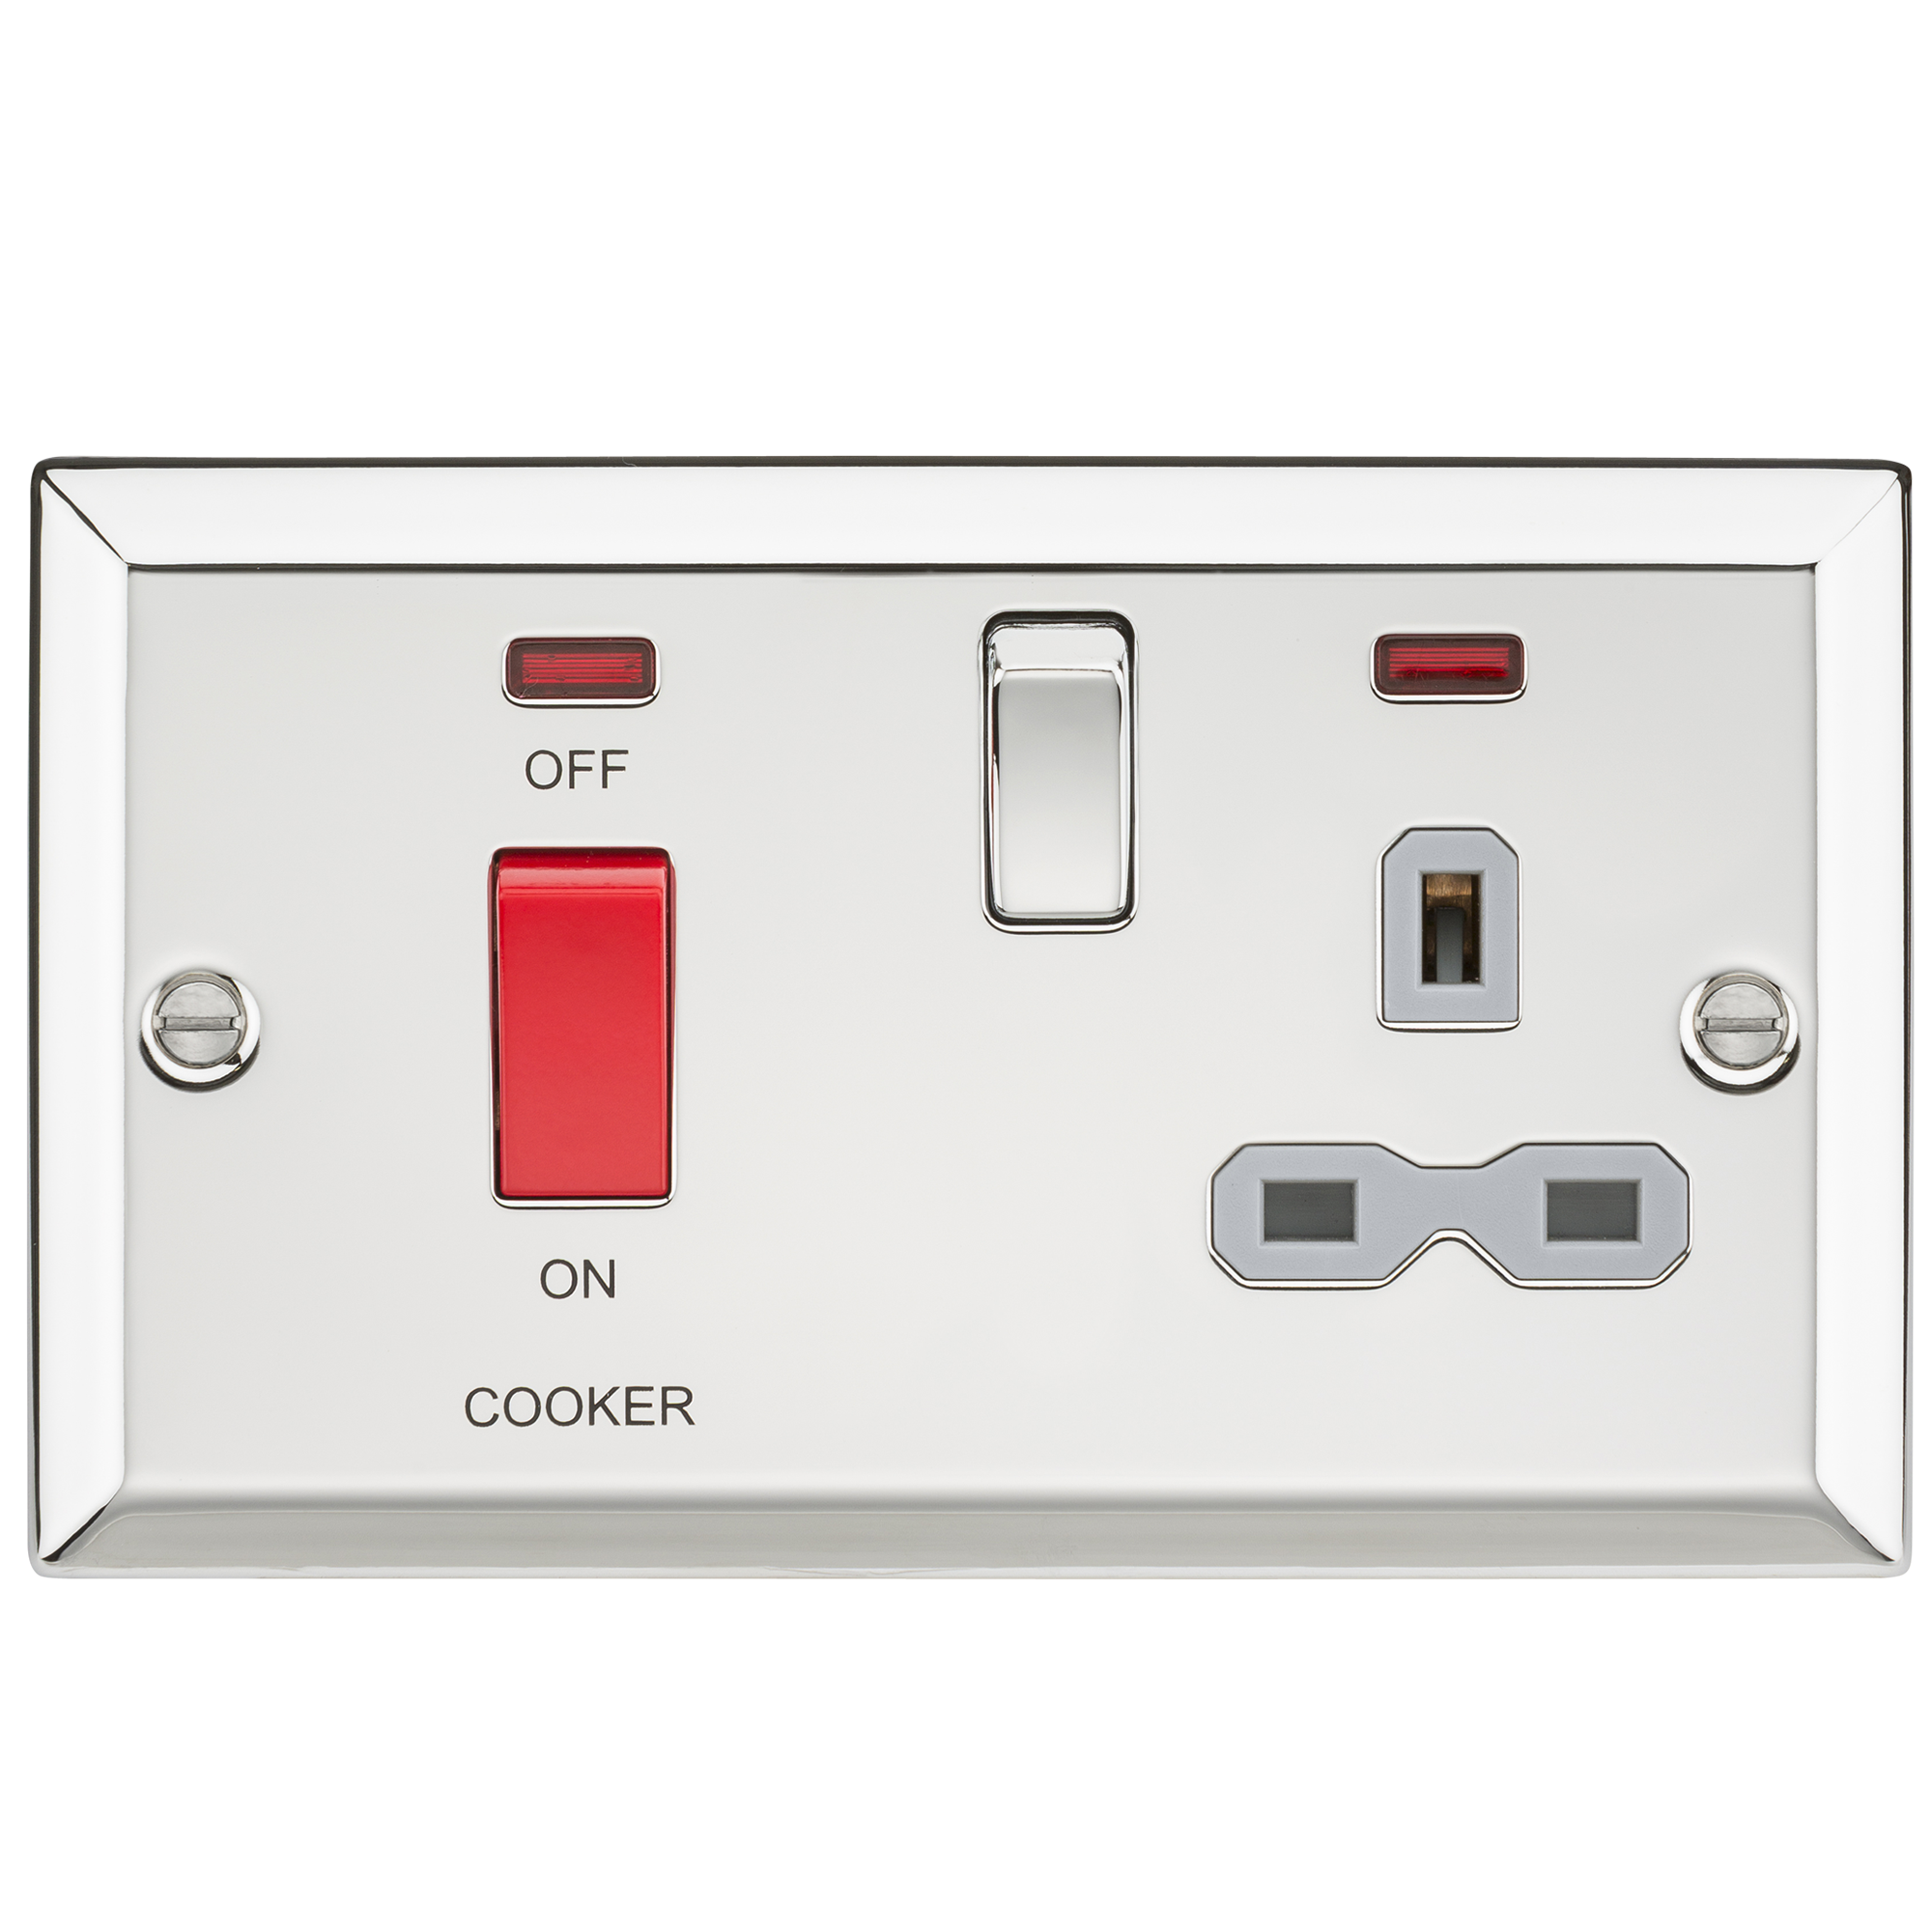 45A DP Cooker Switch & 13A Switched Socket With Neons & Grey Insert - Bevelled Edge Polished Chrome - CV83PCG 